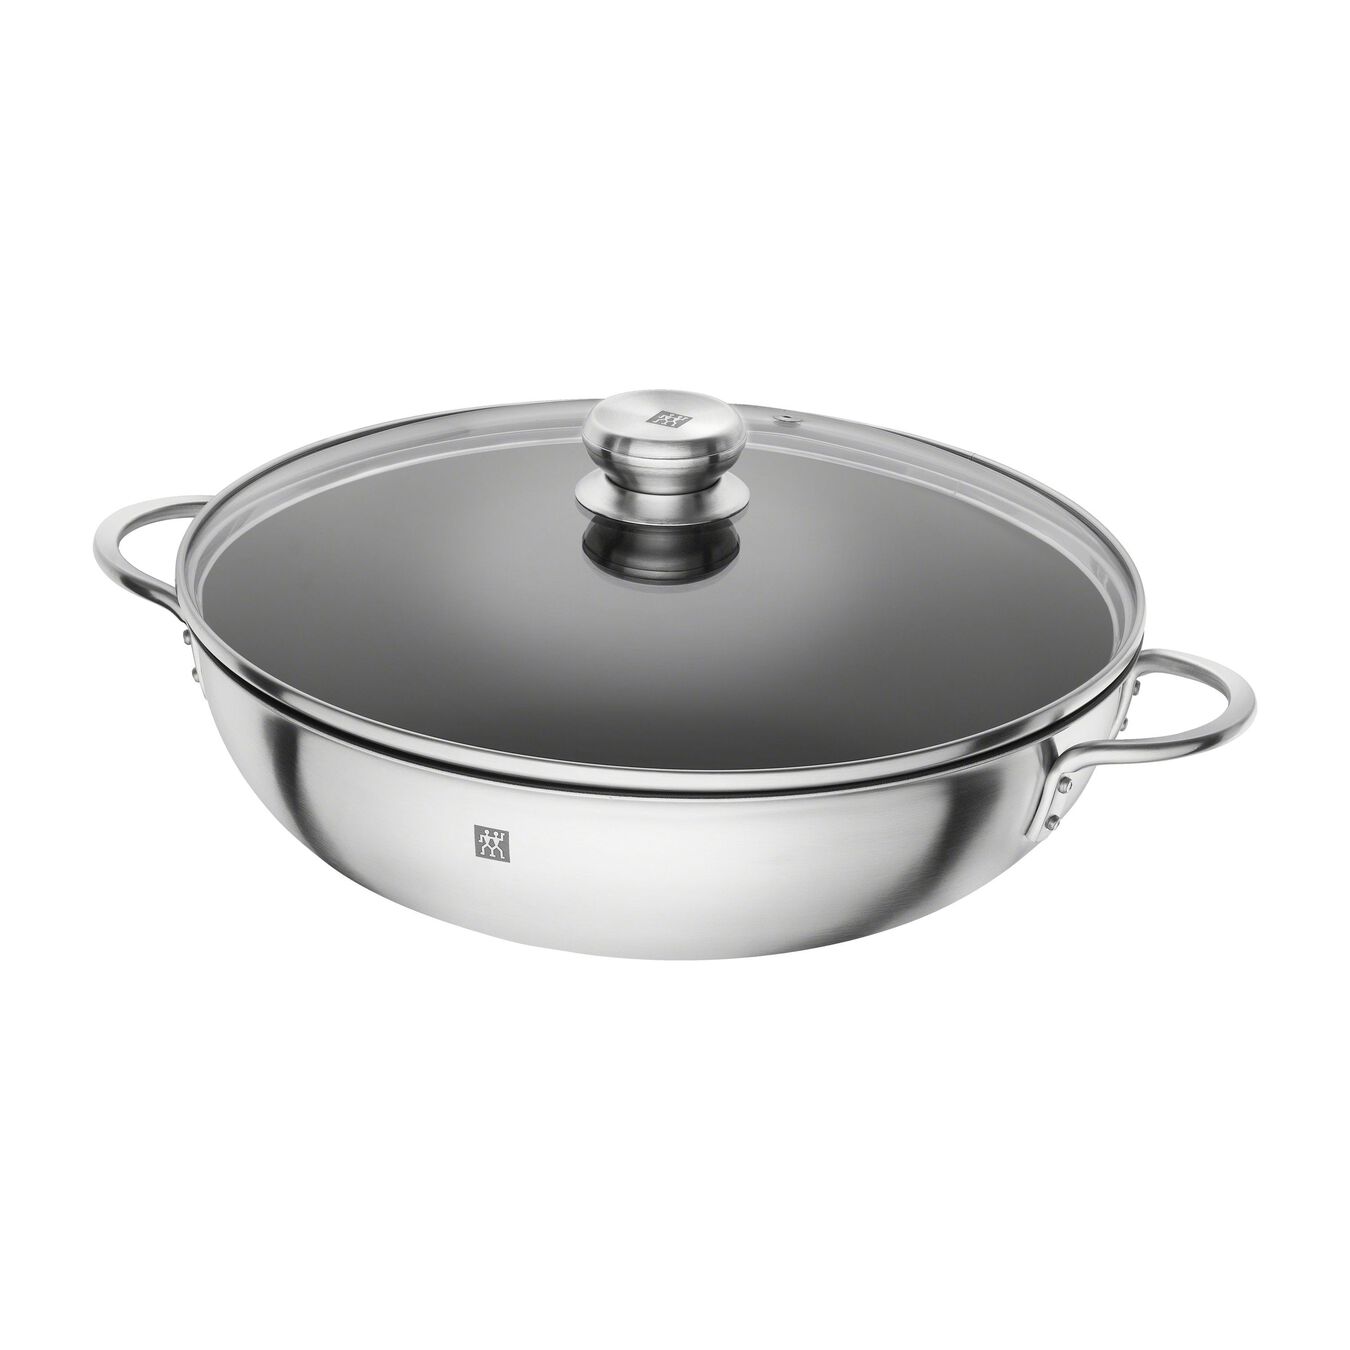 32 cm / 12.5 inch 18/10 Stainless Steel Wok,,large 1